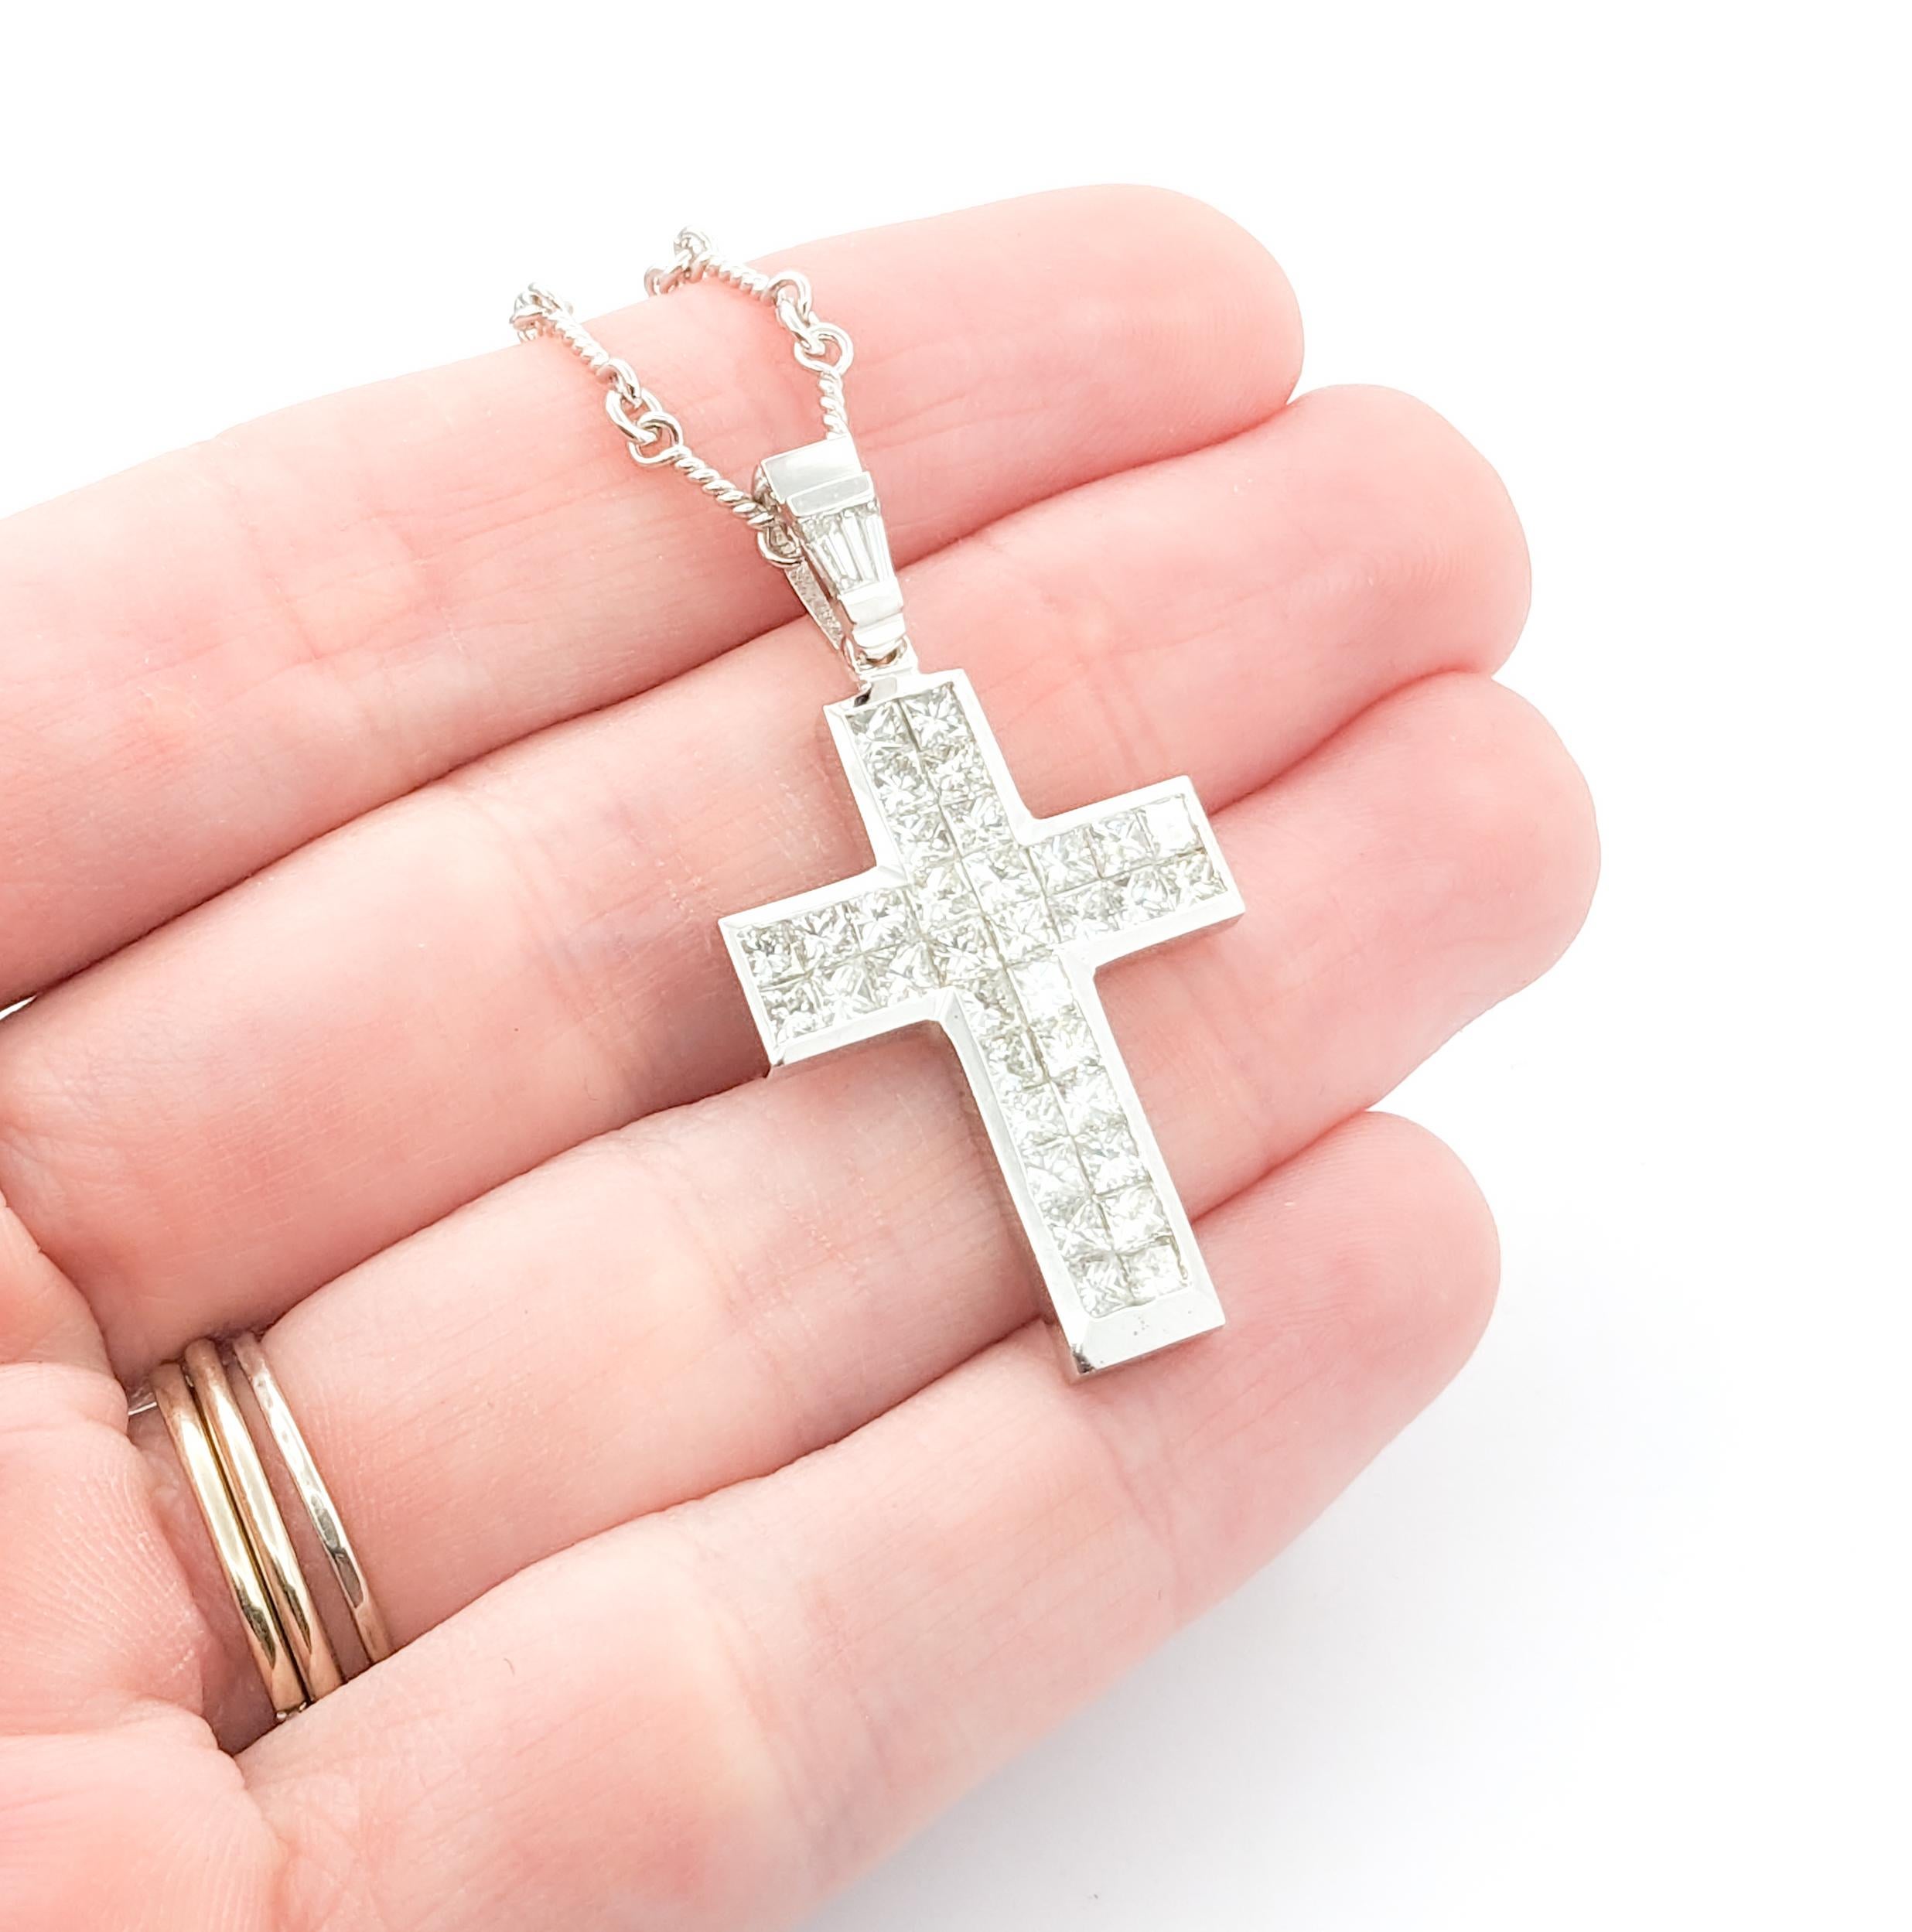 3.ctw Diamond Cross Pendant In White Gold W/Chain

This distinguished Diamond Fashion Pendant features a cross design, beautifully crafted in 18kt white gold. It is adorned with 3.00ctw of meticulously arranged princess and baguette diamonds,